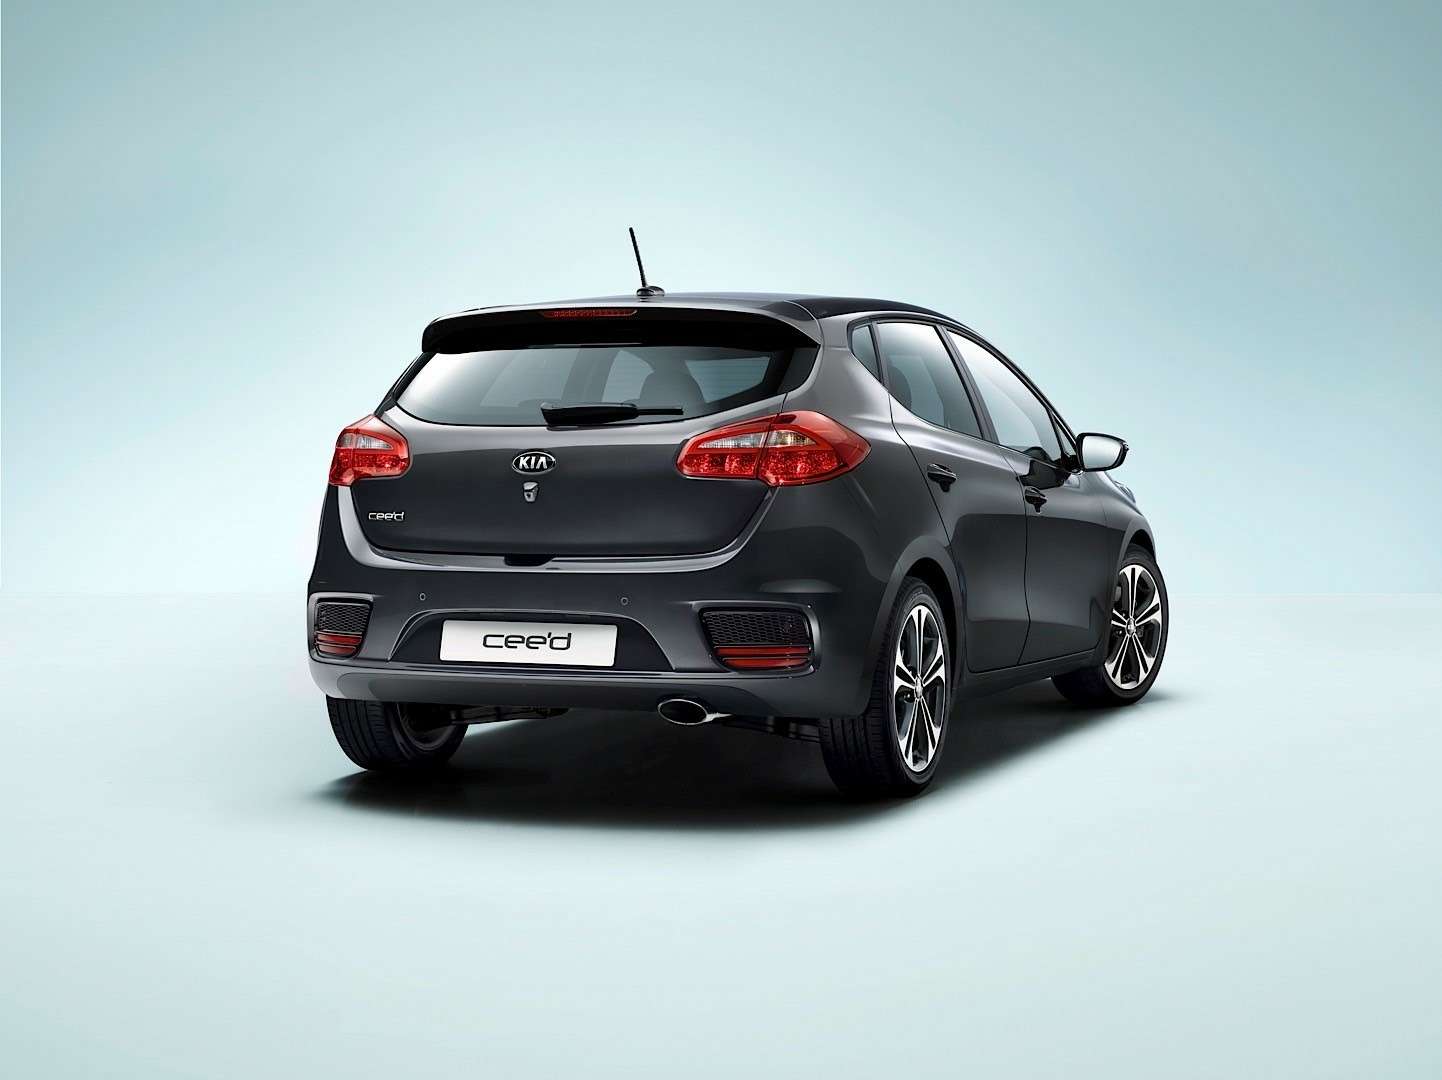 2016-kia-cee-d-brings-subtle-visual-upgrades-new-engines-and-sporty-gt-line-photo-gallery_8